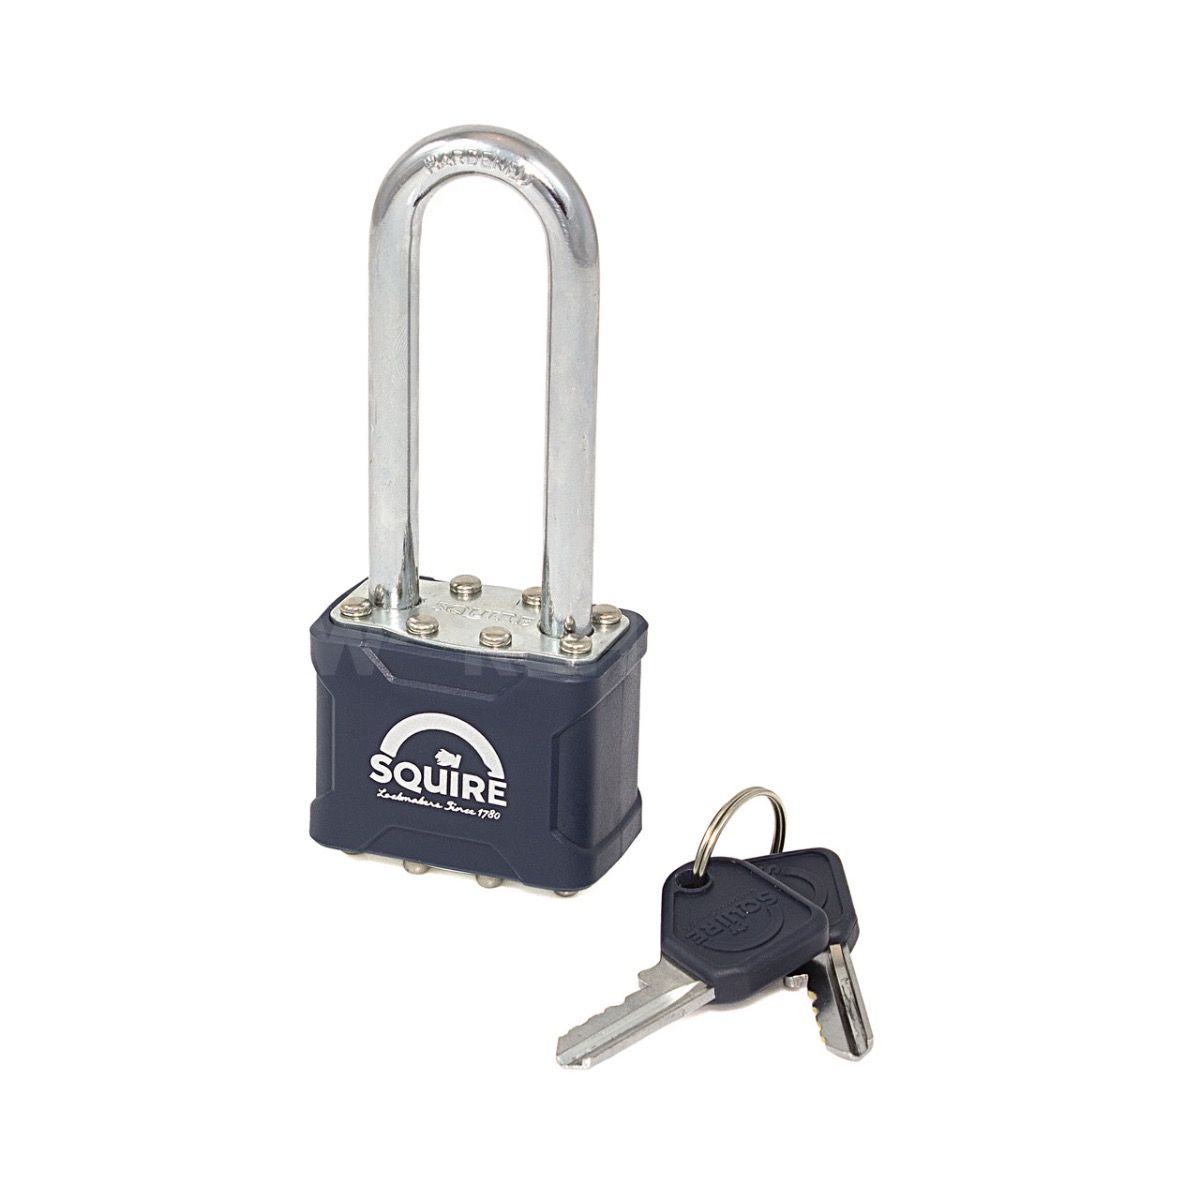 Squire Stronglock 35 - 2.5" Long Shackle Padlock